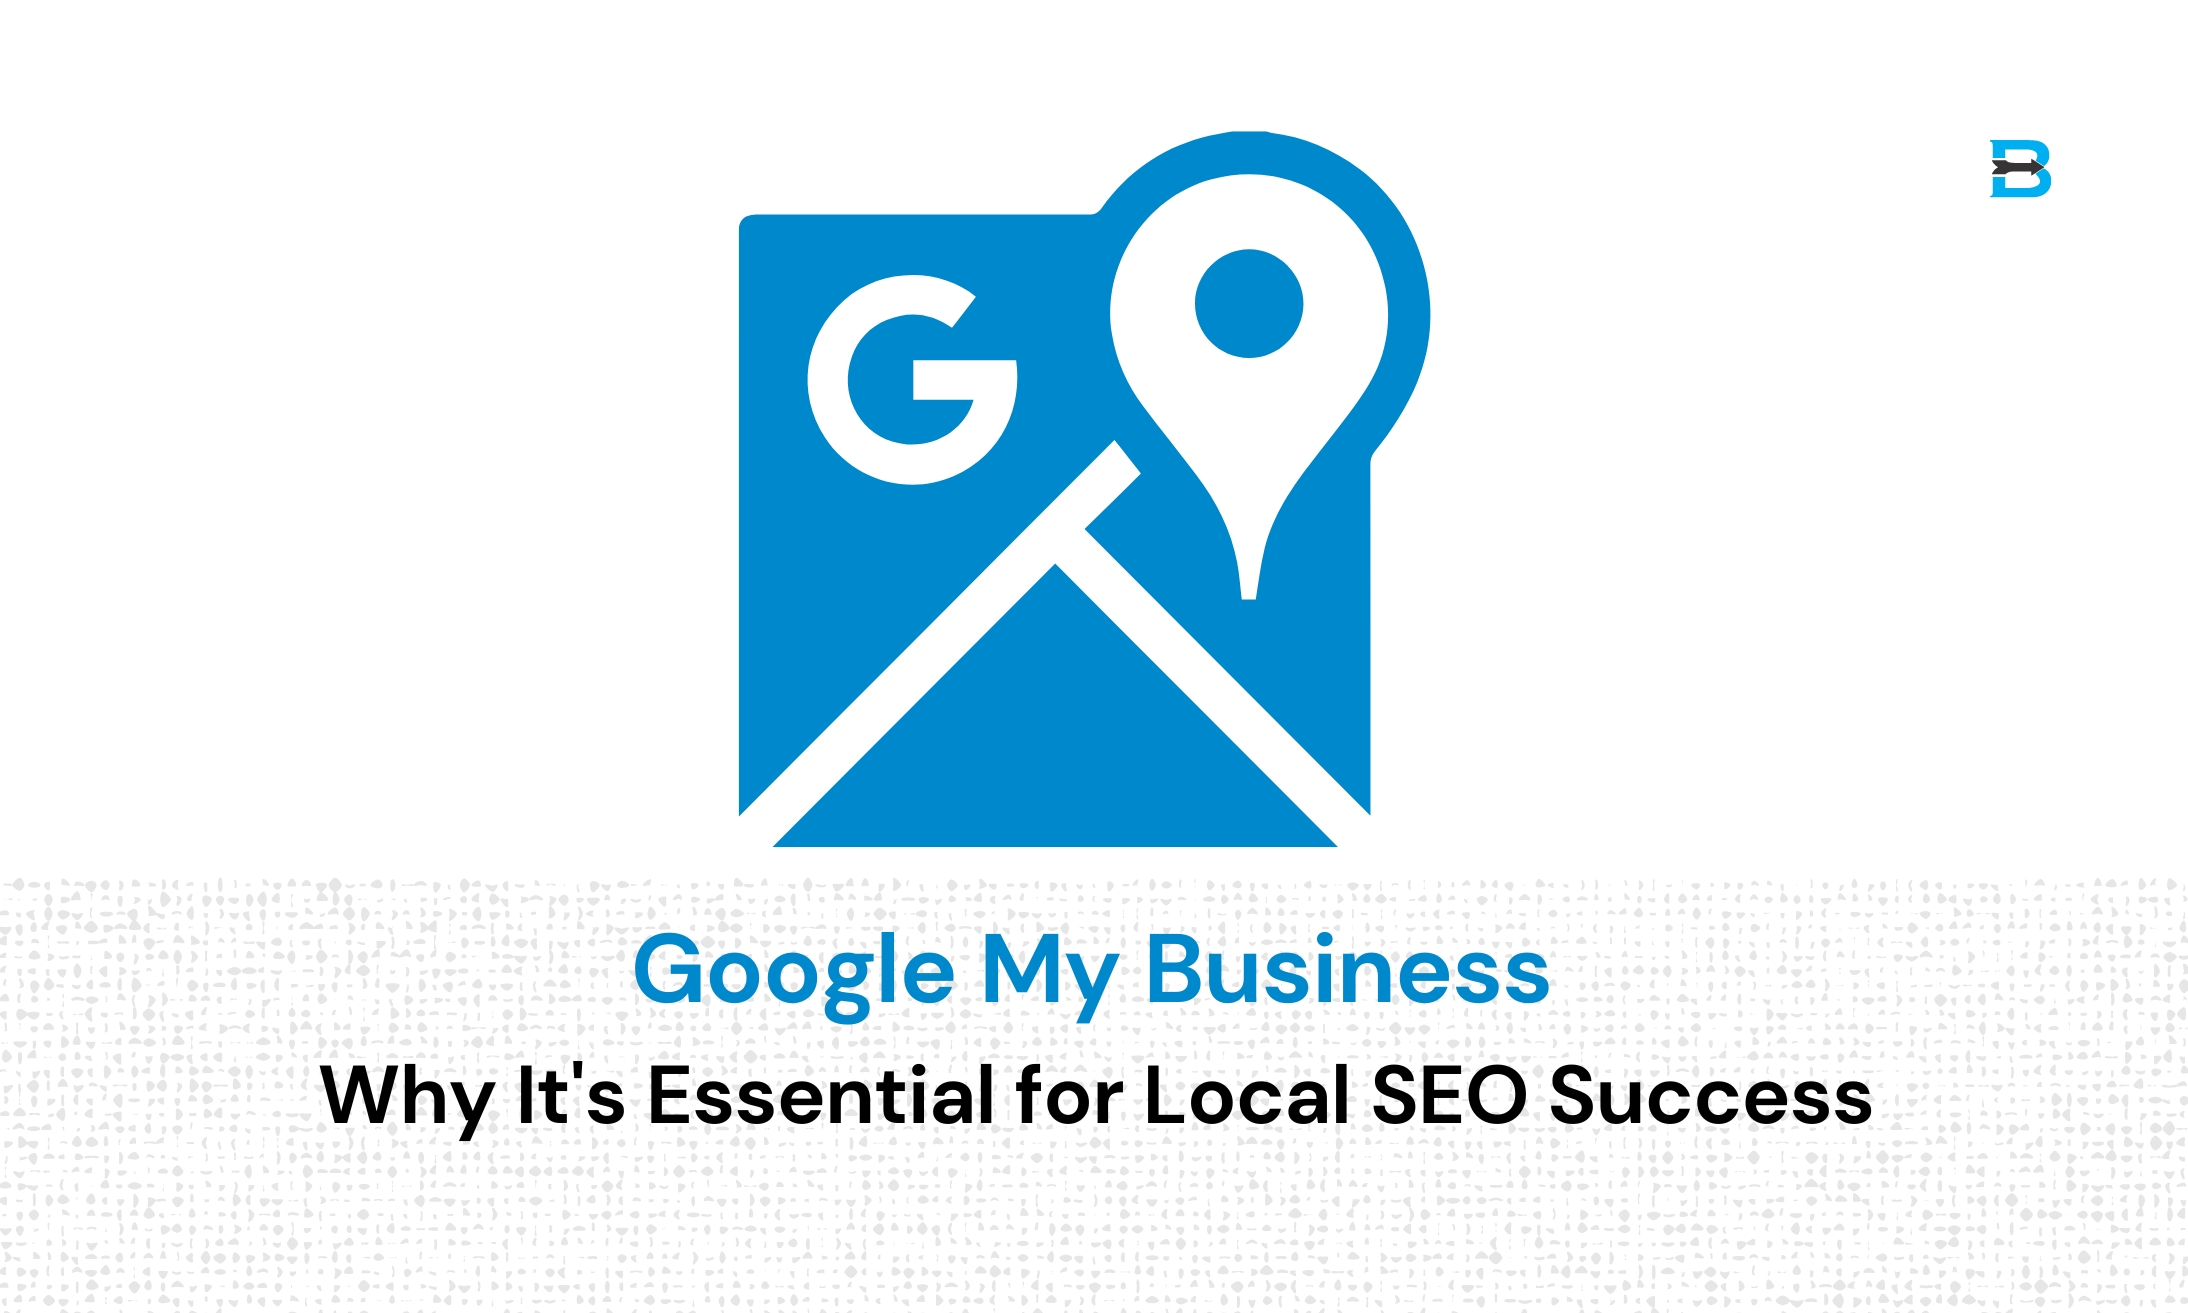 Google My Business Why It's Essential for Local SEO Success